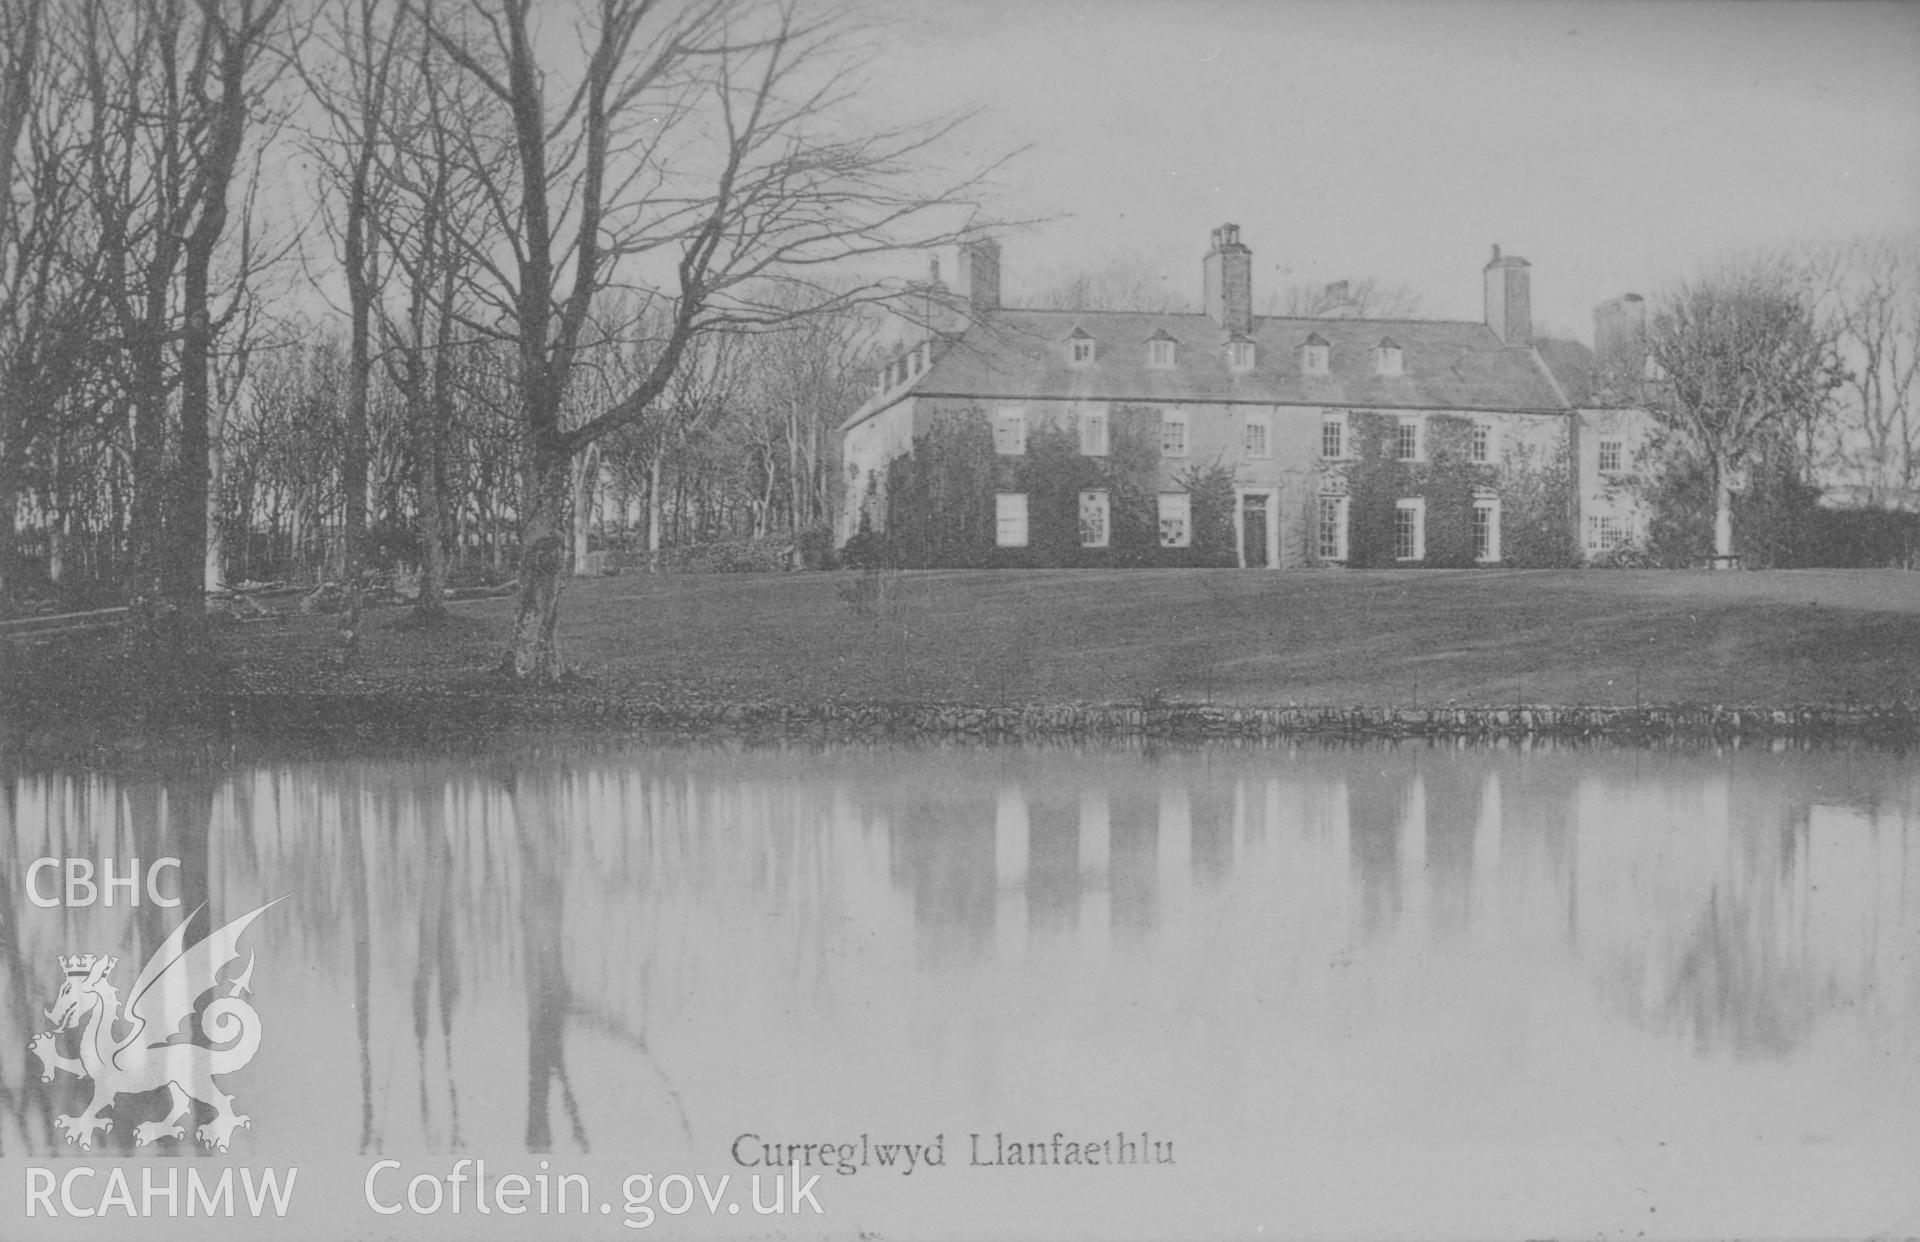 Black and white print of Careglwyd copied from a postcard loaned by Thomas Lloyd.